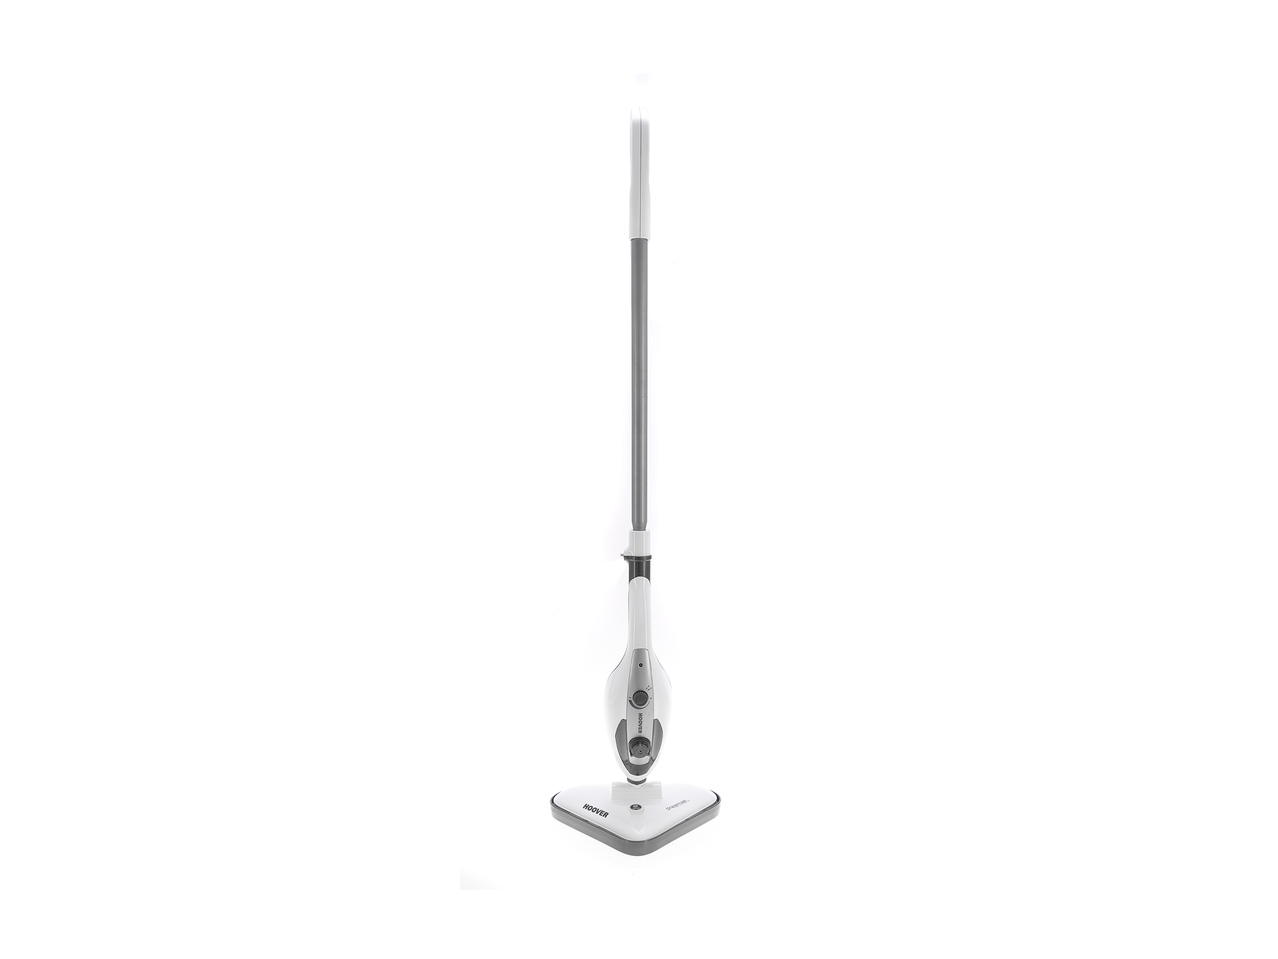 Hoover 2-in-1 Steamjet and Steam Mop1